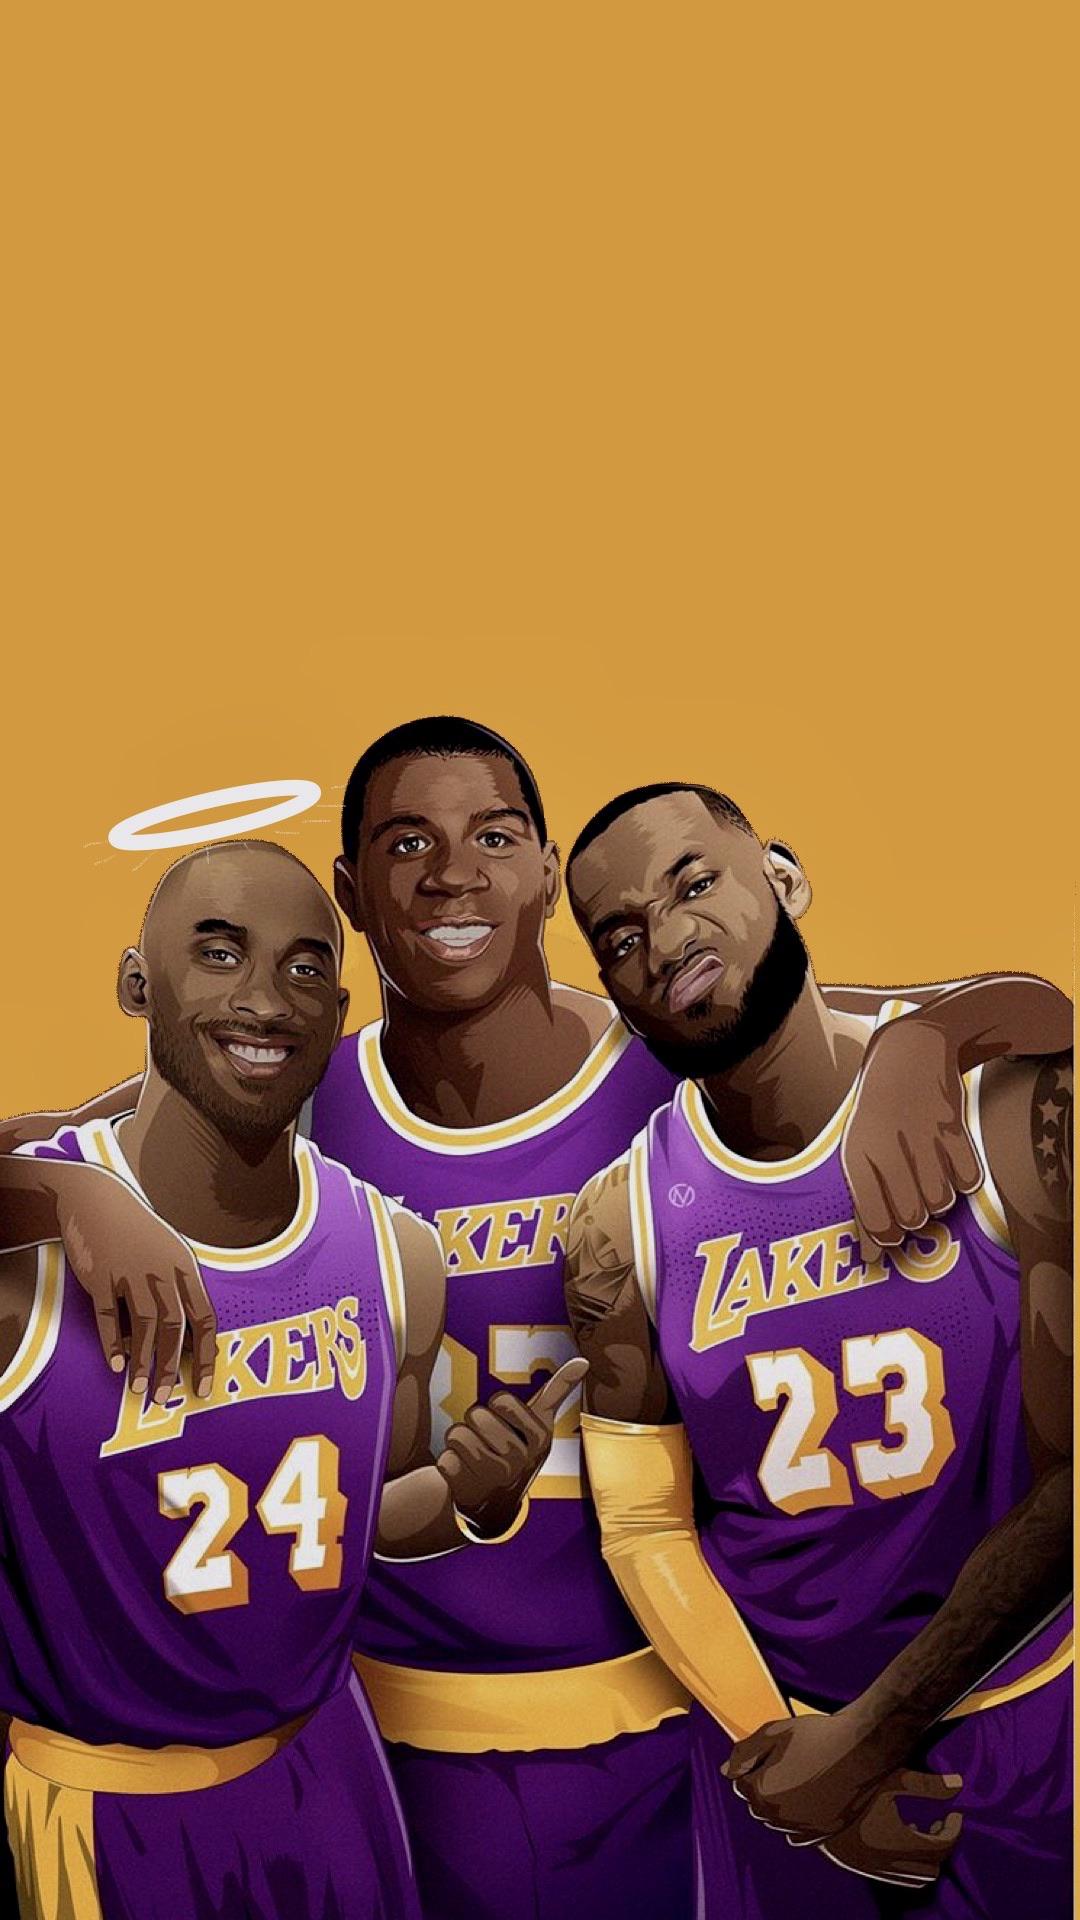 Quick little edit of my favorite wallpaper. Rest easy Mamba